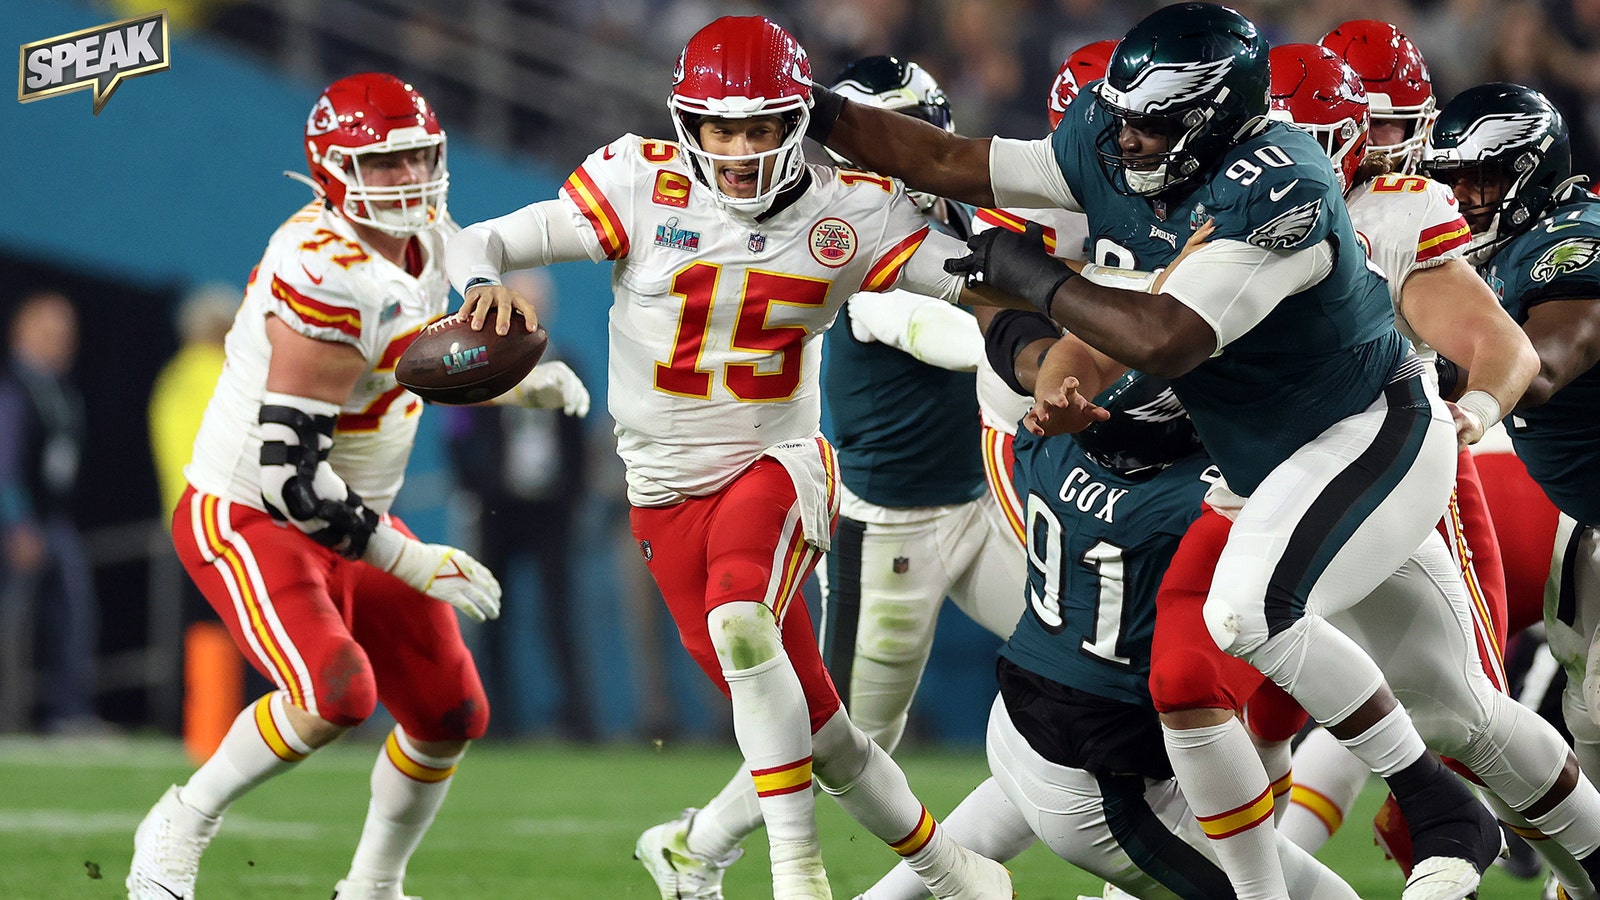 Chiefs host Eagles in a Super Bowl LVII Rematch — who needs the win more?